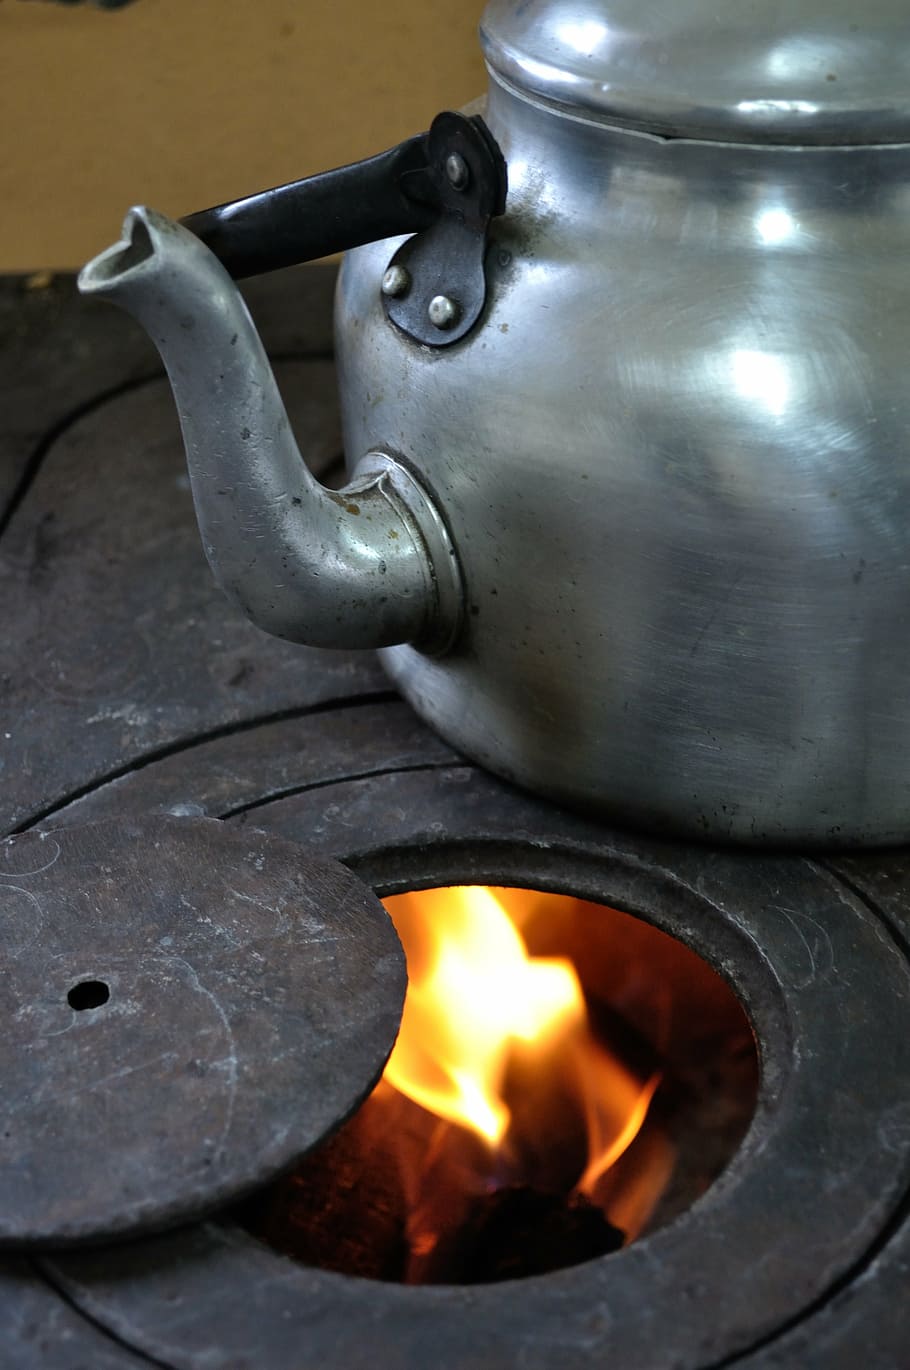 tea, kitchen, fire, burning, heat - temperature, flame, metal, close-up, fire - natural phenomenon, household equipment